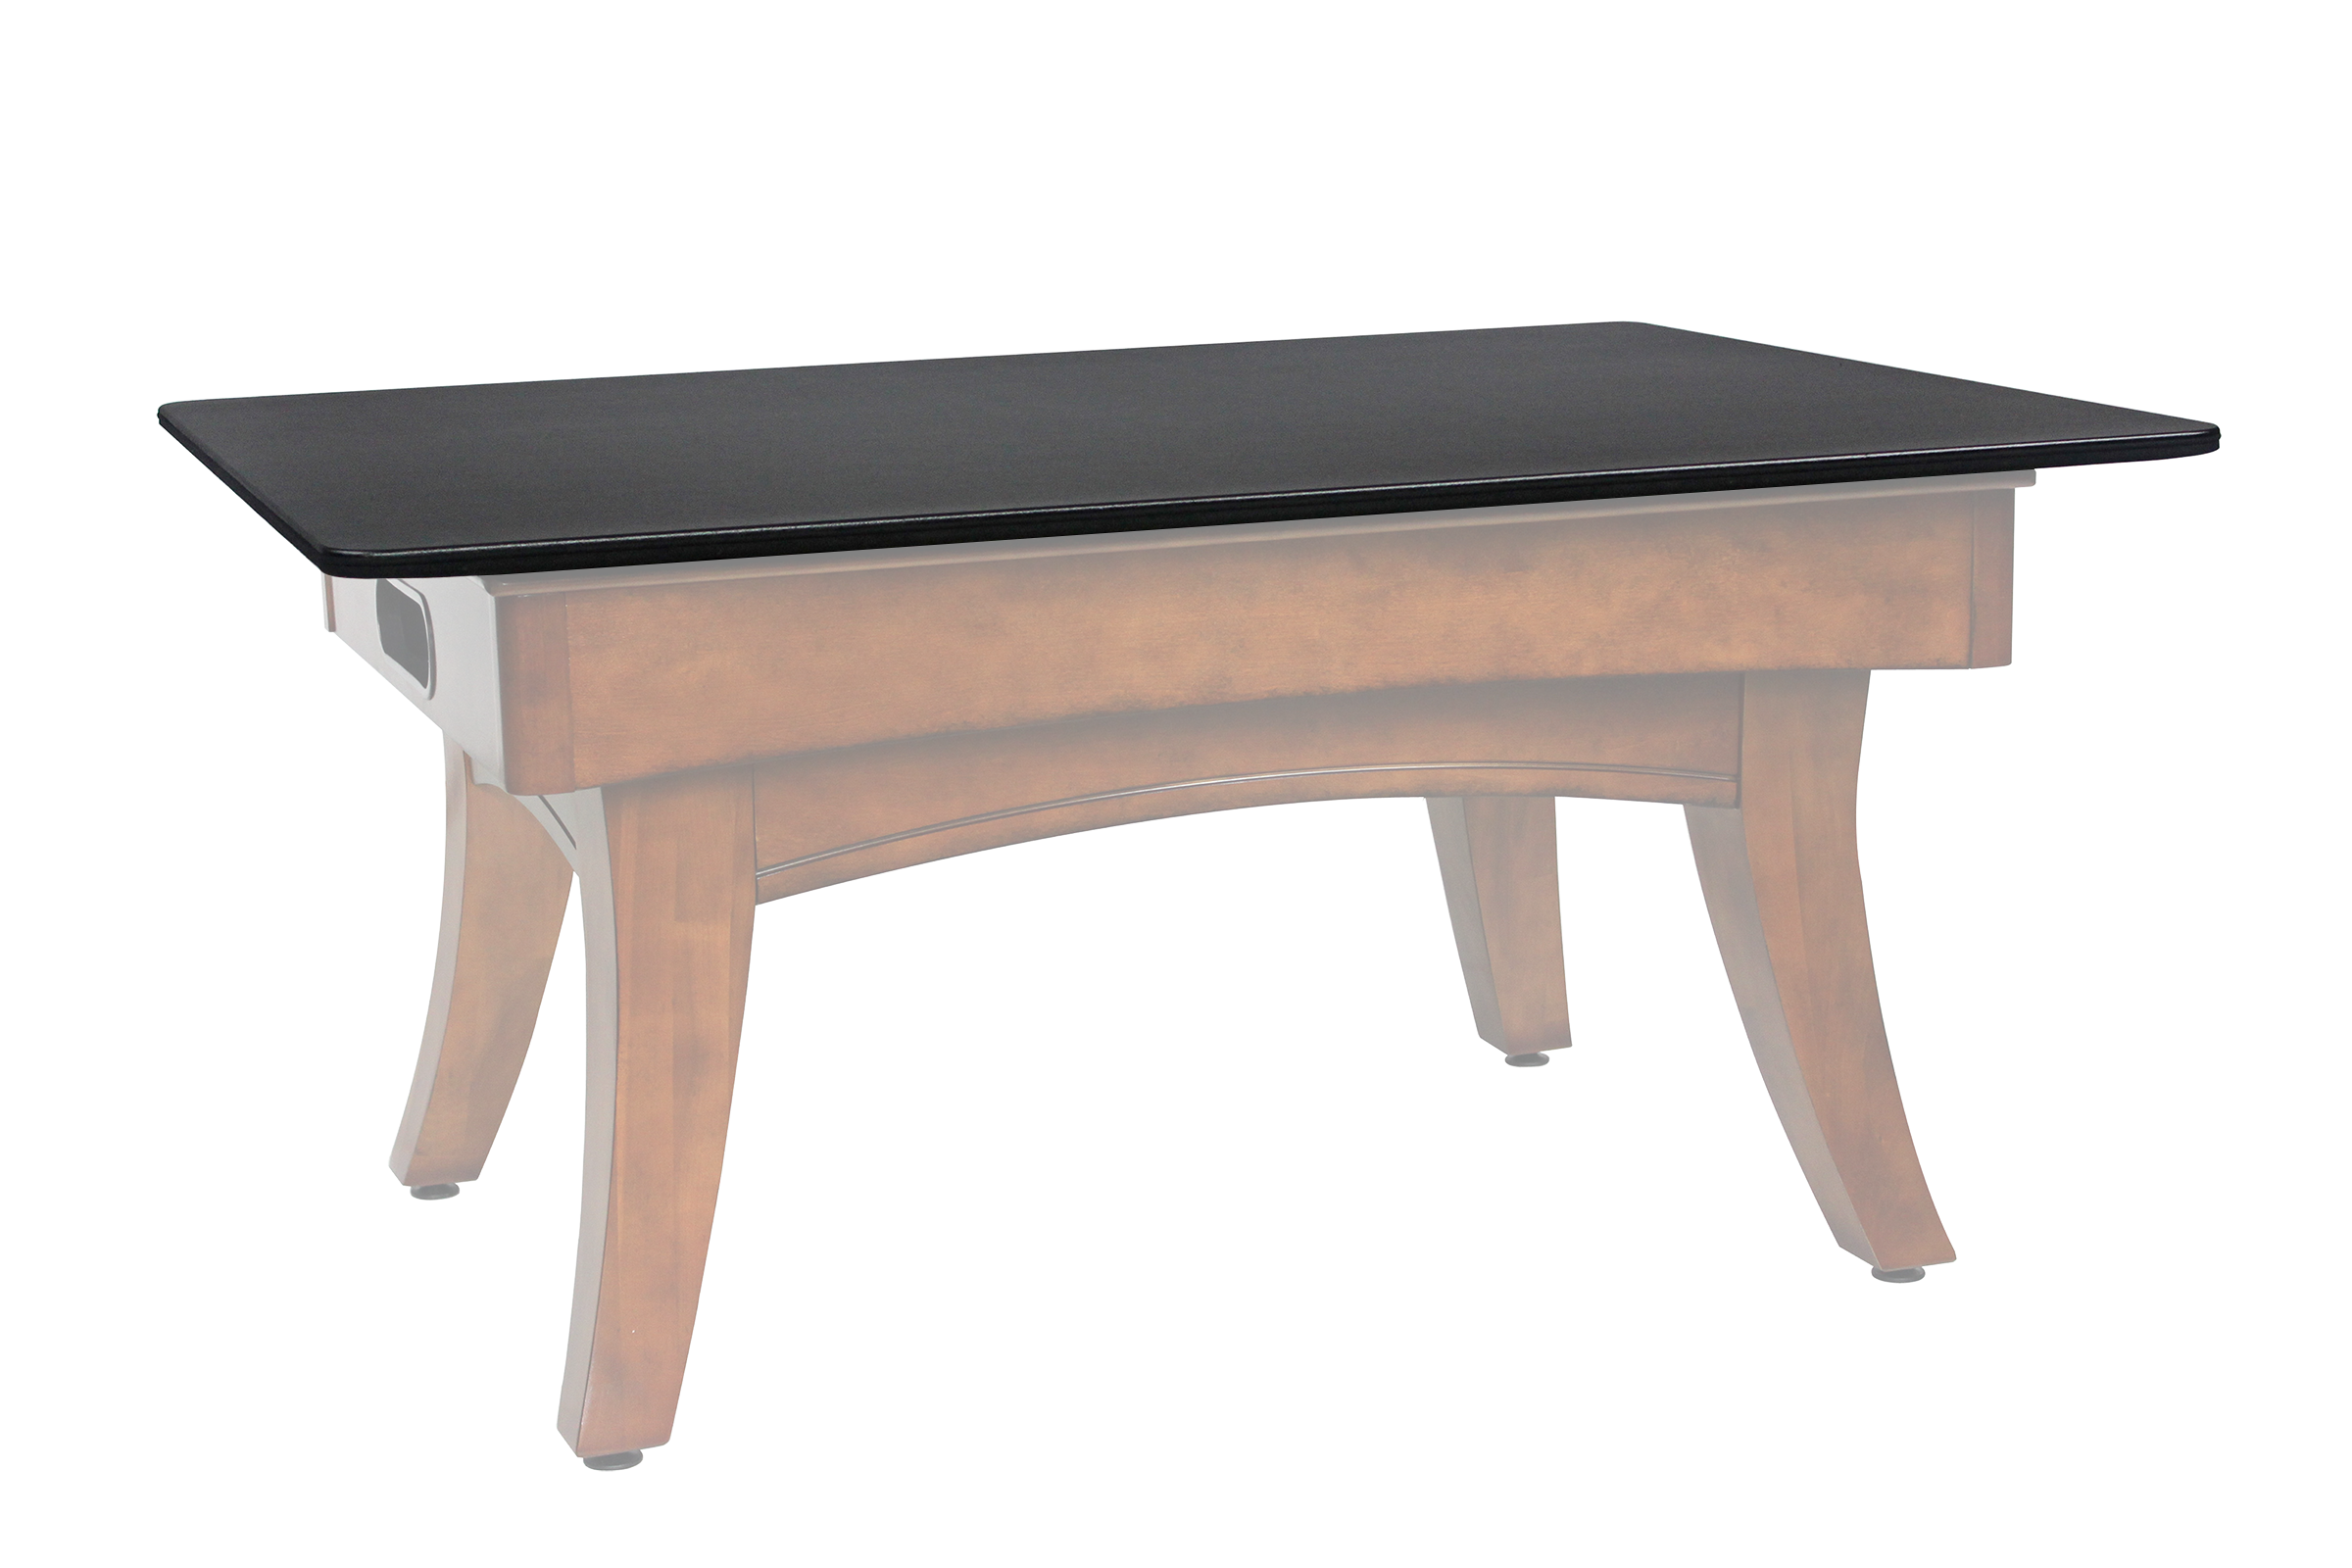 Legacy Billiards 2 in 1 Game Table Top Shown on Top of an Ella Bumper Pool Table Primary Image